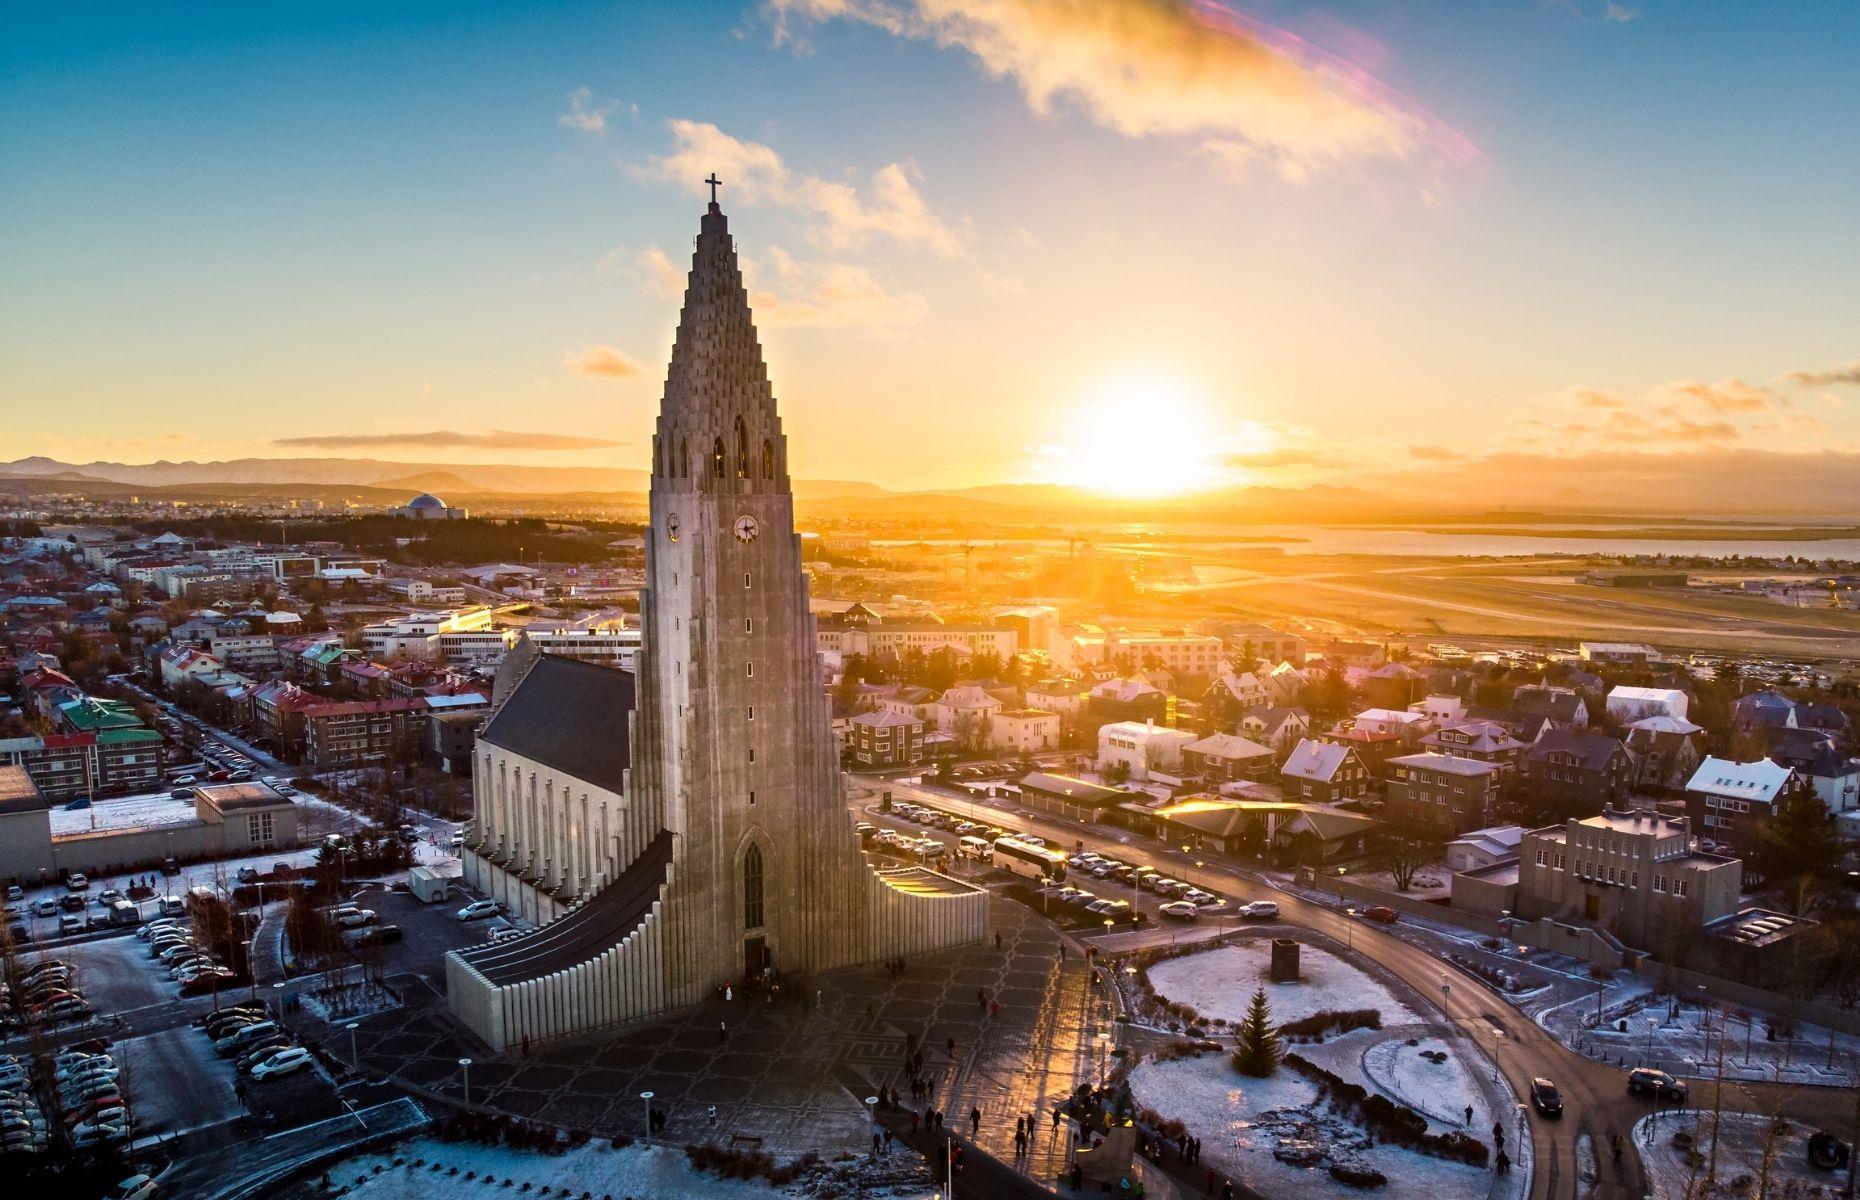 <p>Iceland's capital <a href="https://www.loveexploring.com/guides/64365/what-to-do-in-reykjavik">Reykjavík</a> is loved for its quaint wooden houses, unique museums and world-class restaurants, but also for having one of the world's most striking churches. Hallgrímskirkja stands proud in the heart of the city with its distinctive stepped concrete façade reminiscent of the country's basalt column rock formations. Despite all of the incredible natural sights in Iceland, Hallgrímskirkja remains one of the country's most visited tourist spots with thousands of tourists stepping inside this eye-catching church in a typical year.</p>  <p><a href="https://www.loveexploring.com/news/92411/explore-reykjavik-old-harbour-district-grandi-iceland-nordic-holidays"><strong>Explore Reykjavík's Grandi Harbour district, near to Hallgrímskirkja</strong></a></p>